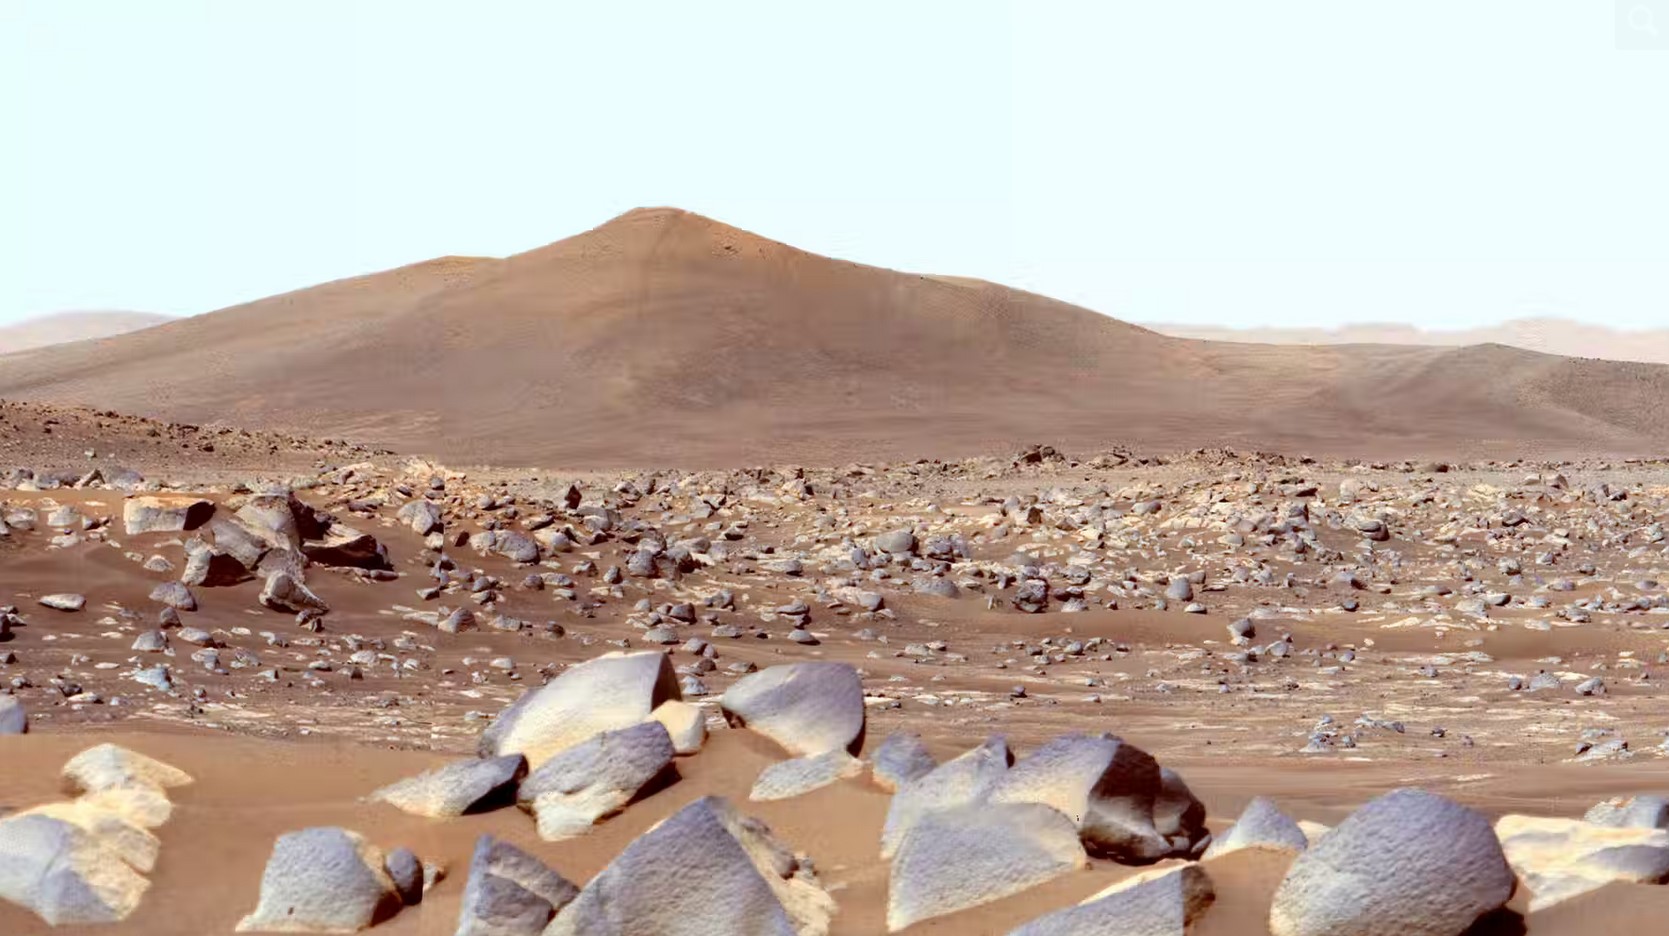 The surface rocks of the red planet Mars Mars